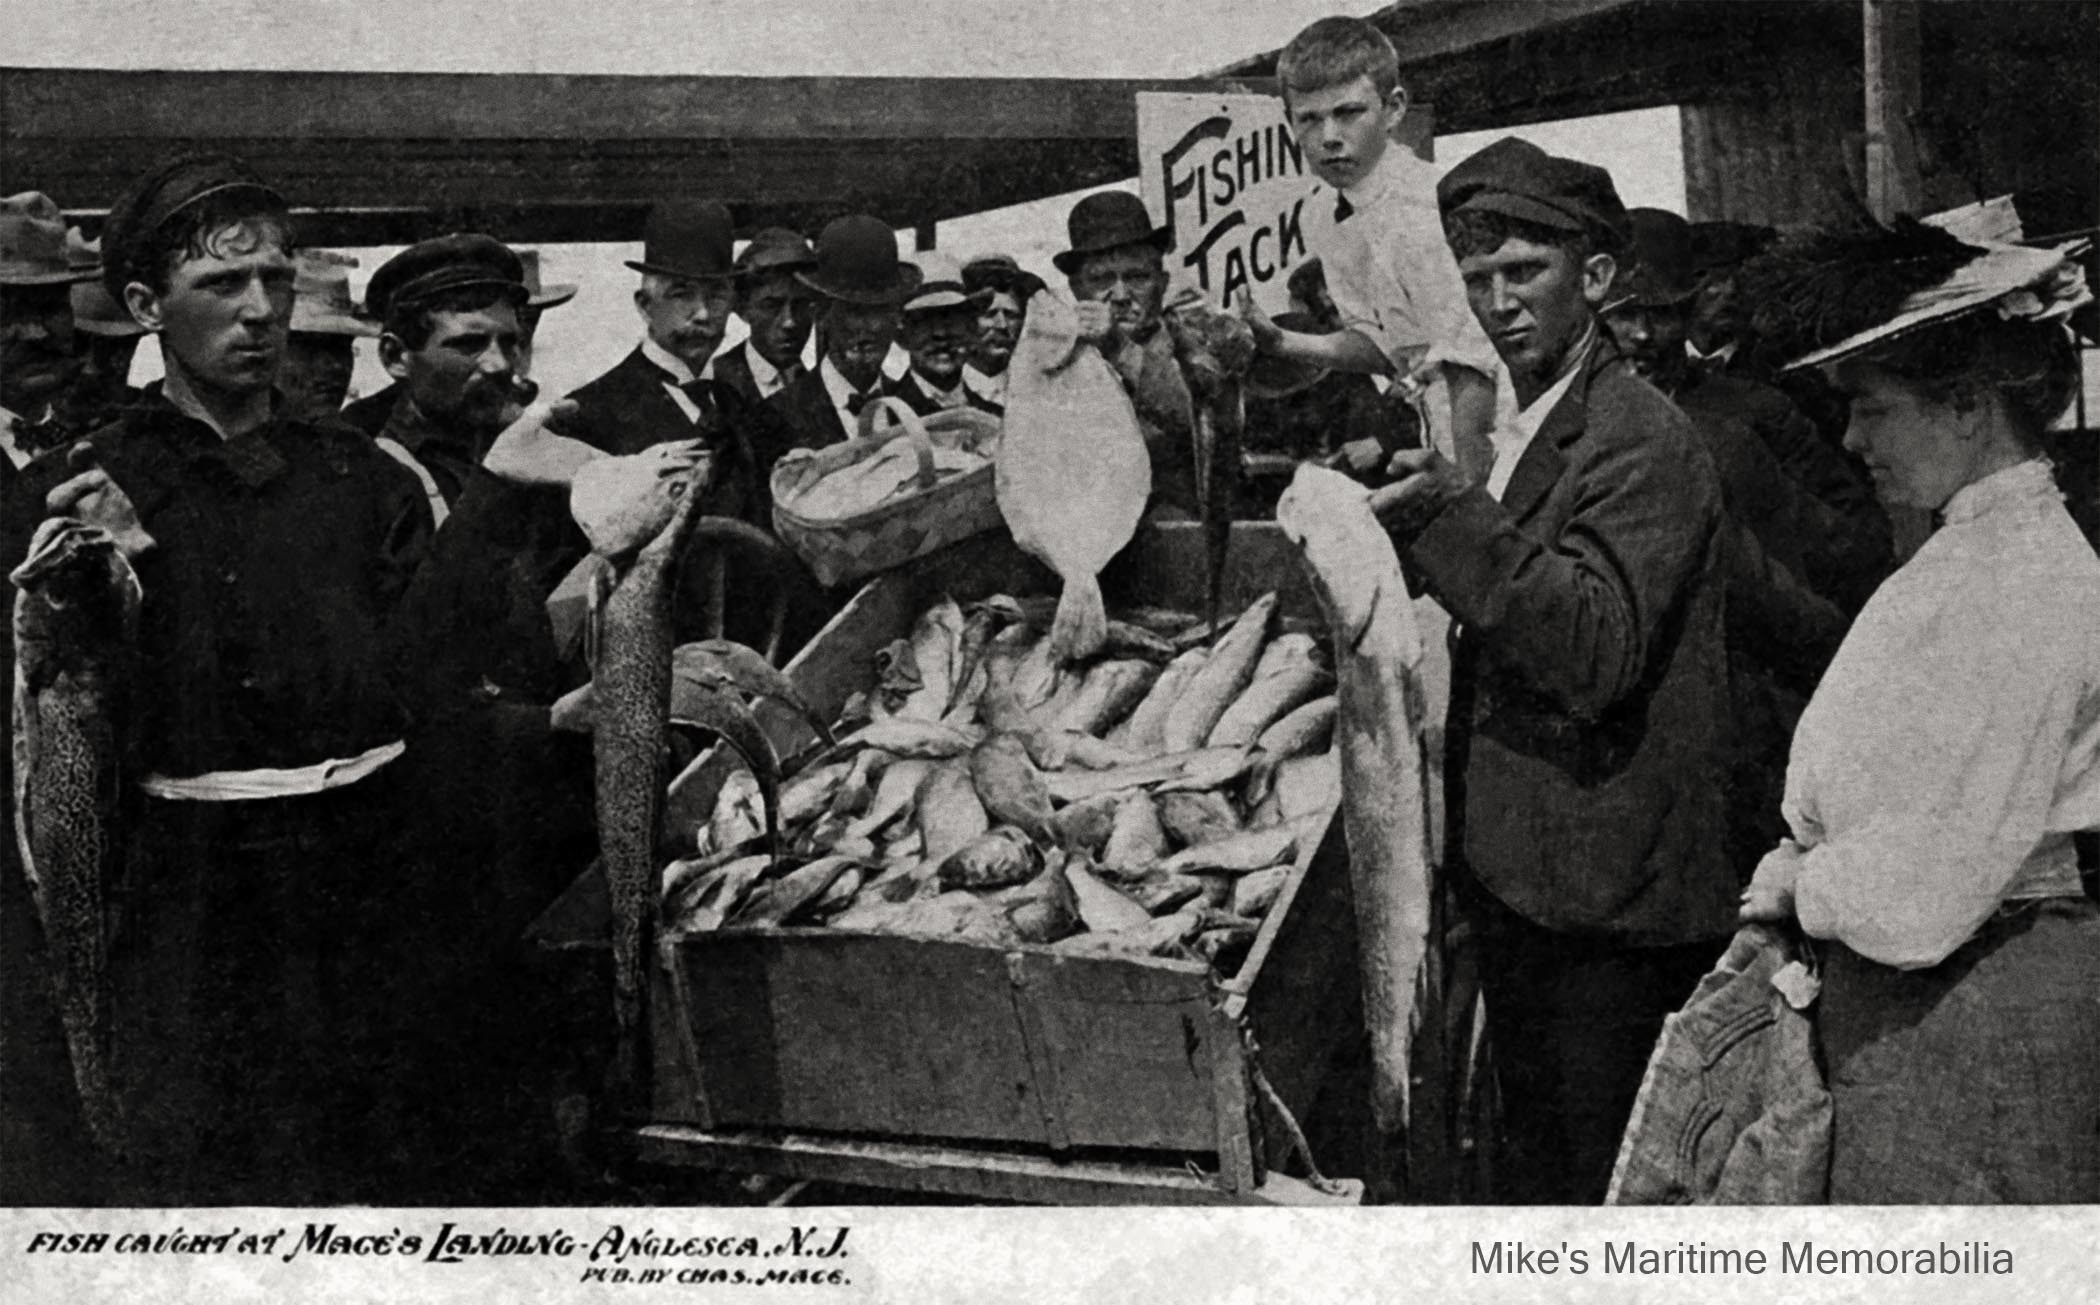 MACE'S LANDING, Anglesea, NJ – 1905 A glimpse of the great catches to be had at Anglesea, NJ during this era. This 1905 postcard from Mace's Landing at Anglesea, NJ shows a huge catch of Fluke, Weakfish, Porgies and Black Sea Bass being sold from a wheeled cart. Bowler hats for the gents and Ostrich feather hats for the ladies were the norm.